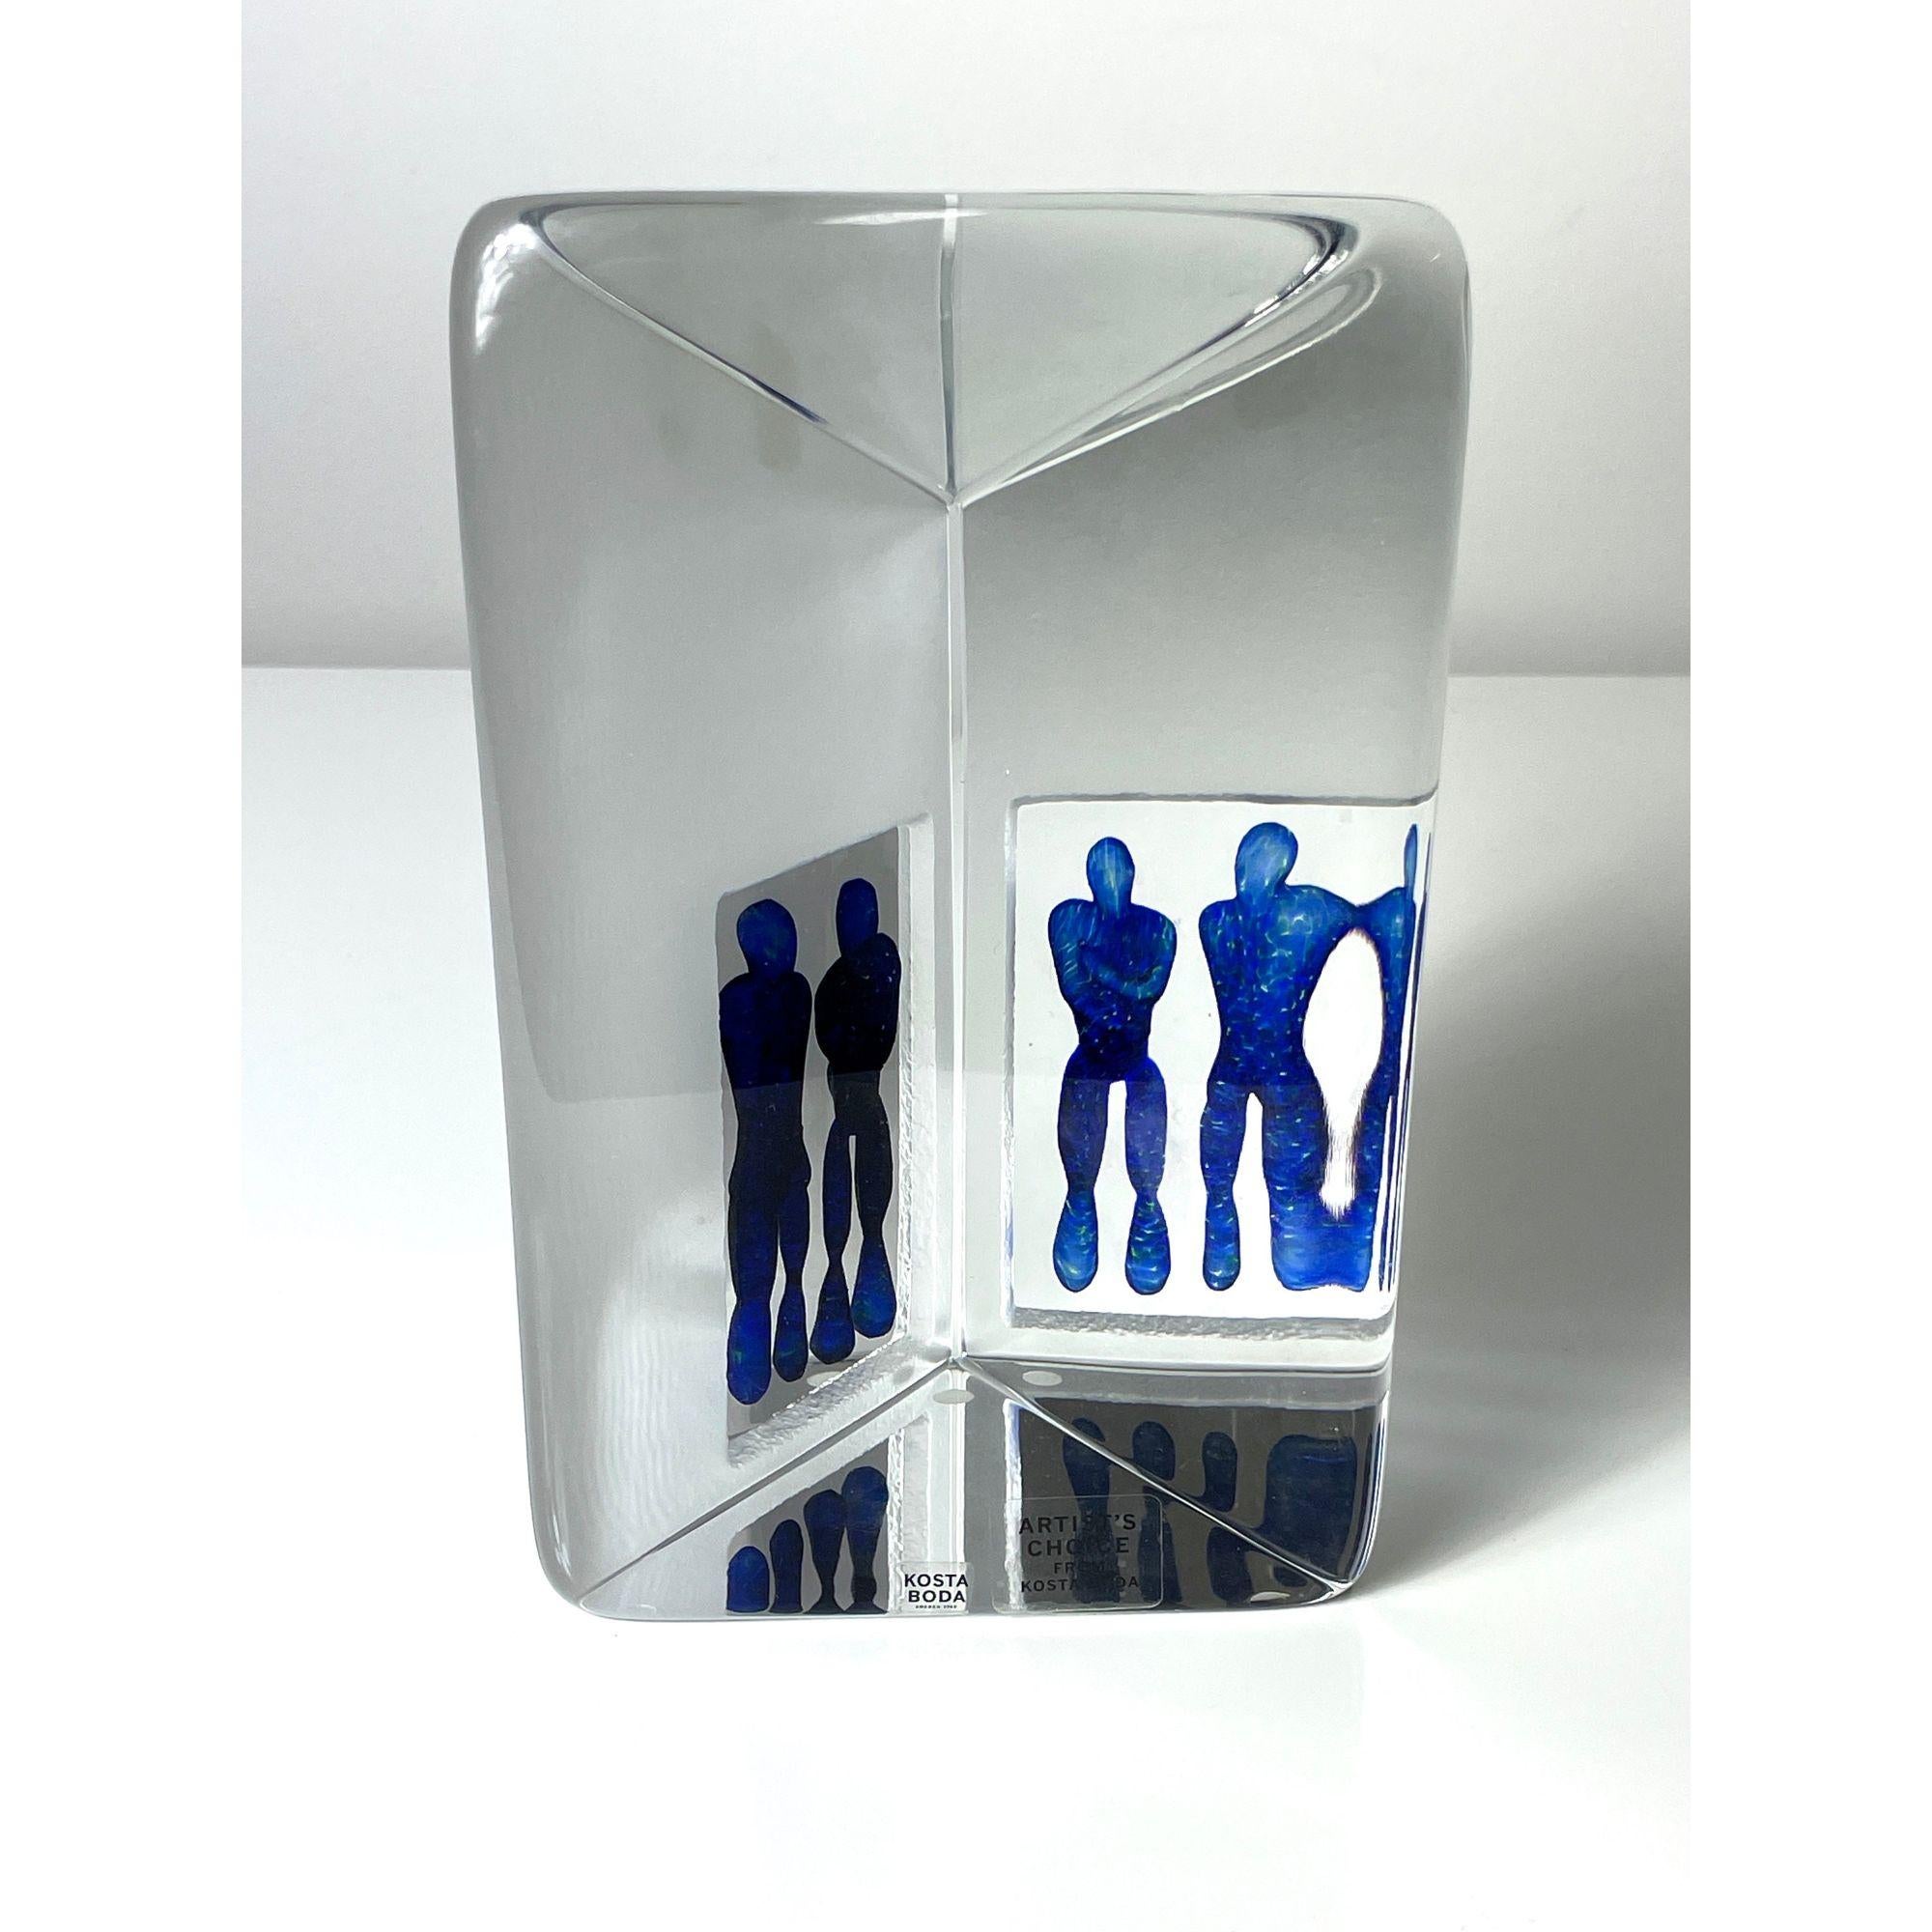 Vintage Reflections Glass Sculpture by Bertil Vallian for Kosta Boda c 1995 In Good Condition For Sale In Troy, MI